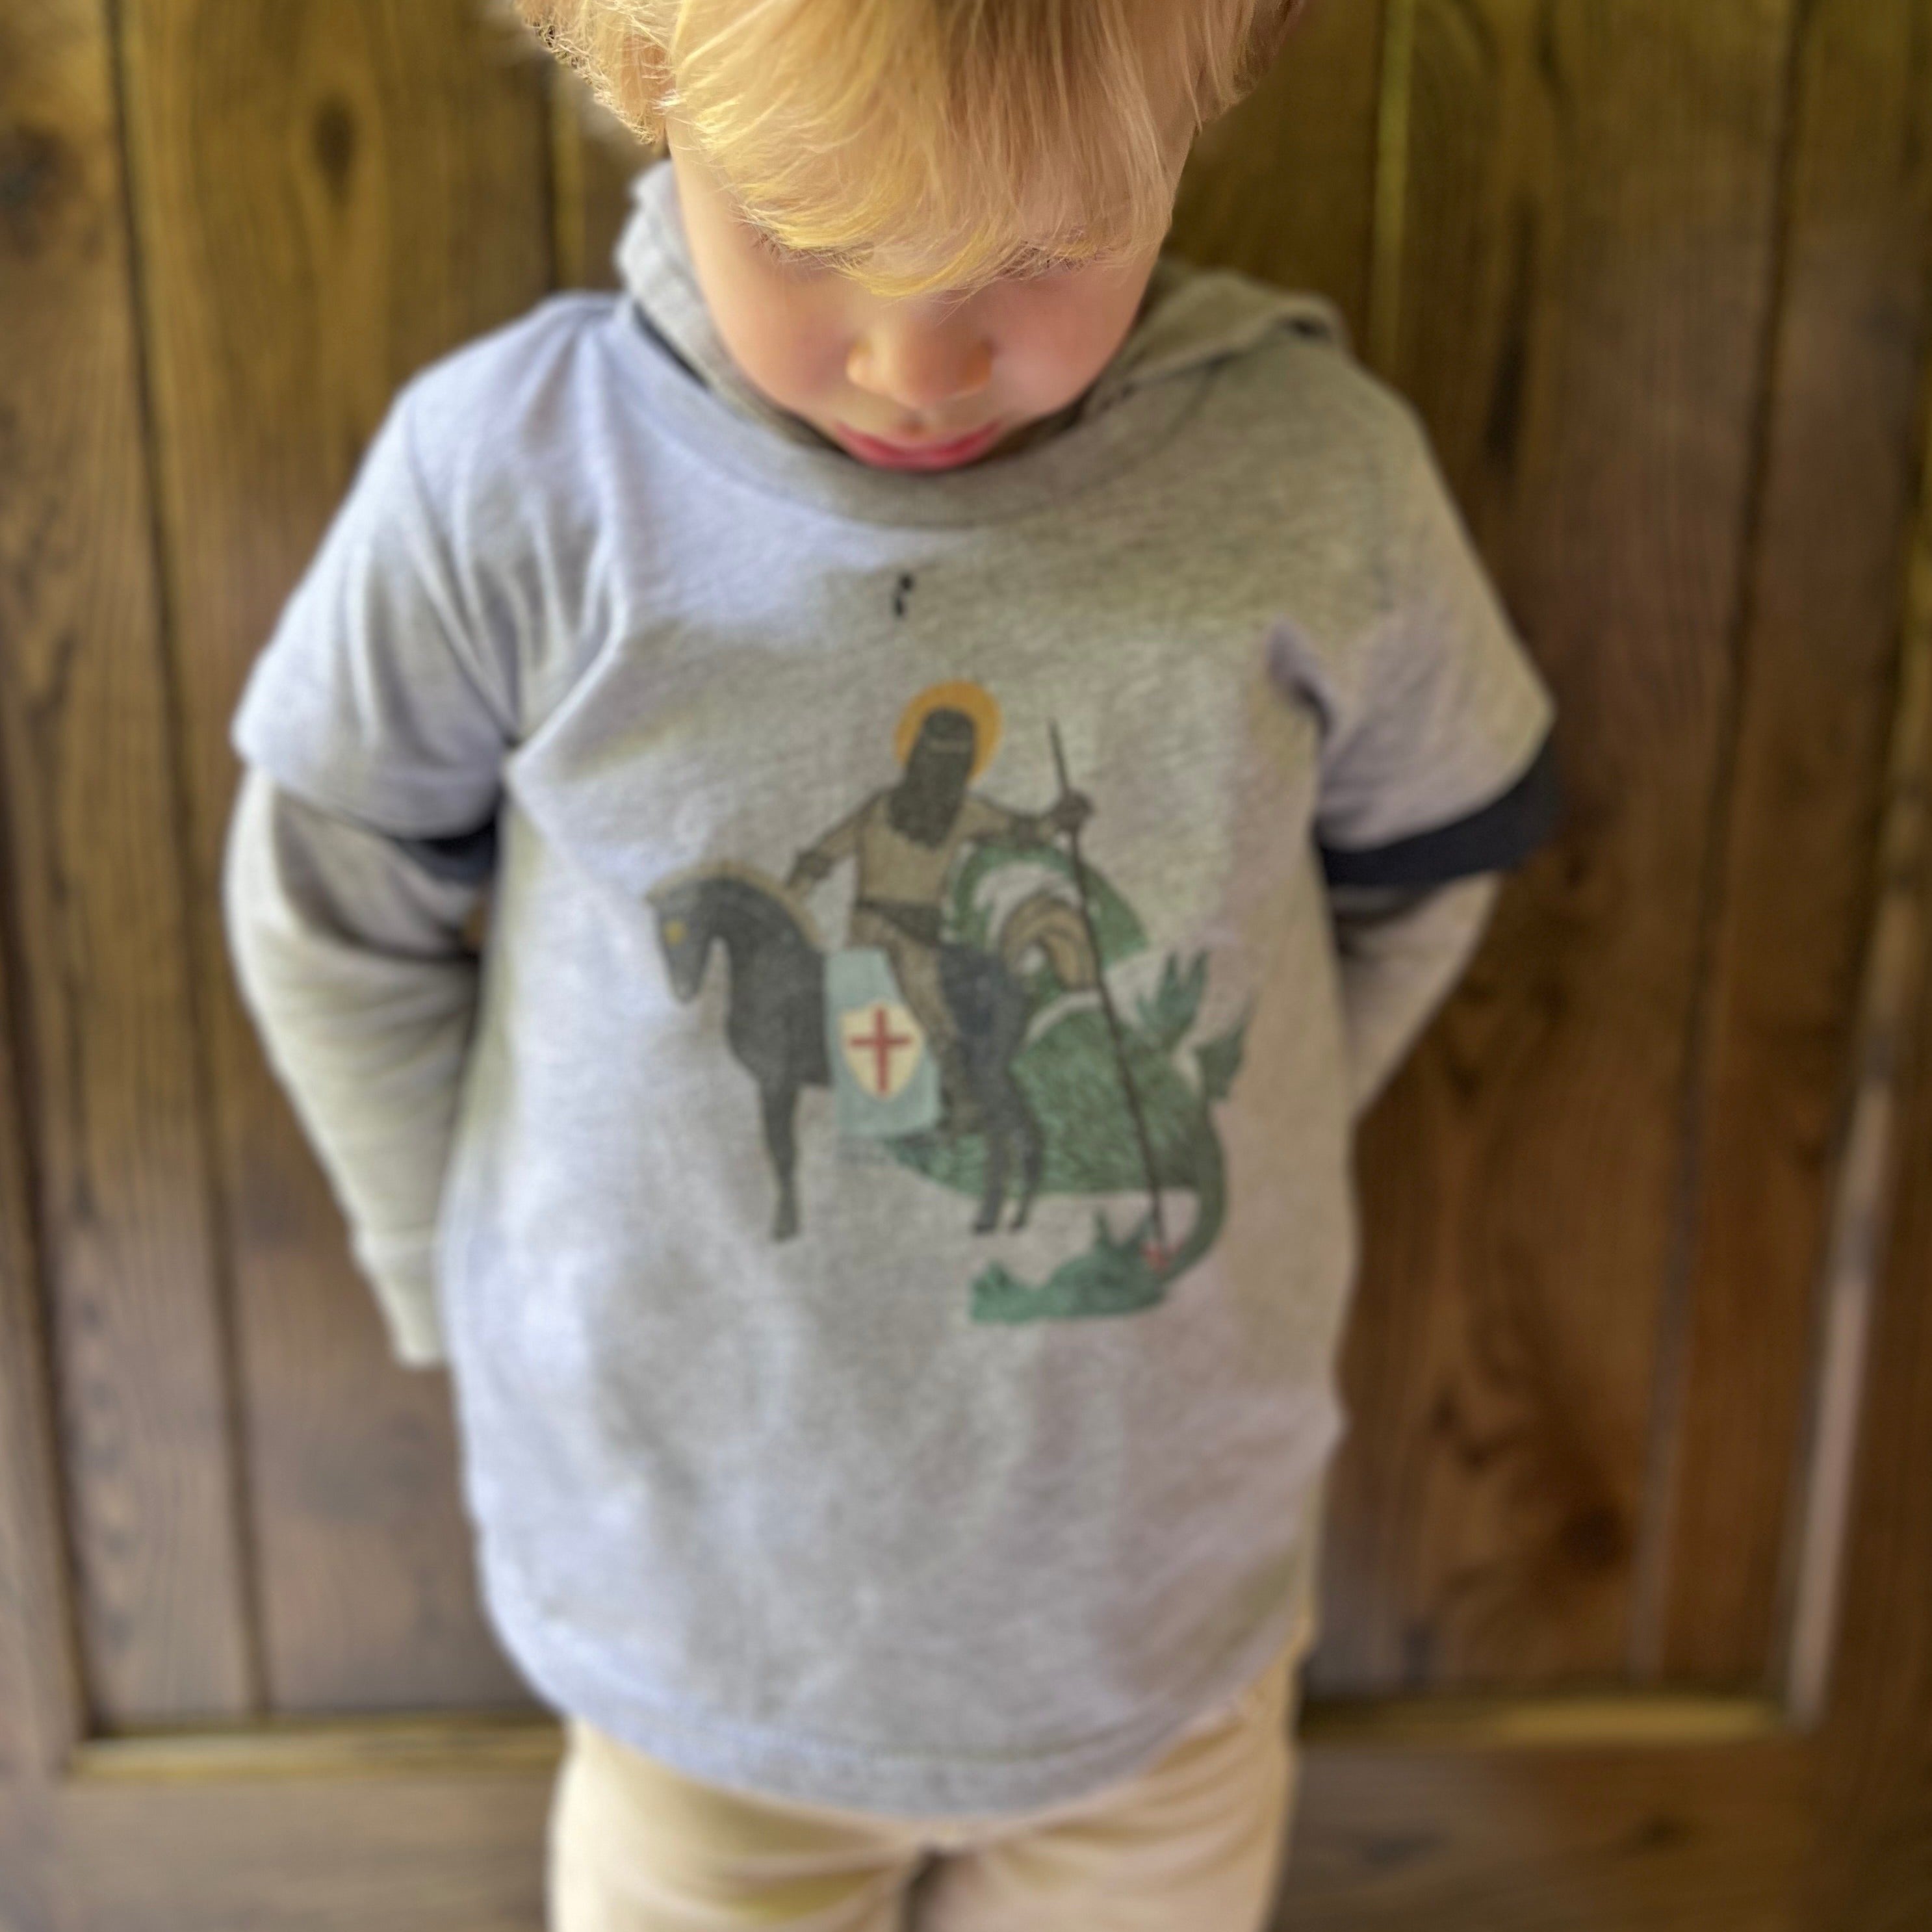 St. George and the Dragon Toddler Tee